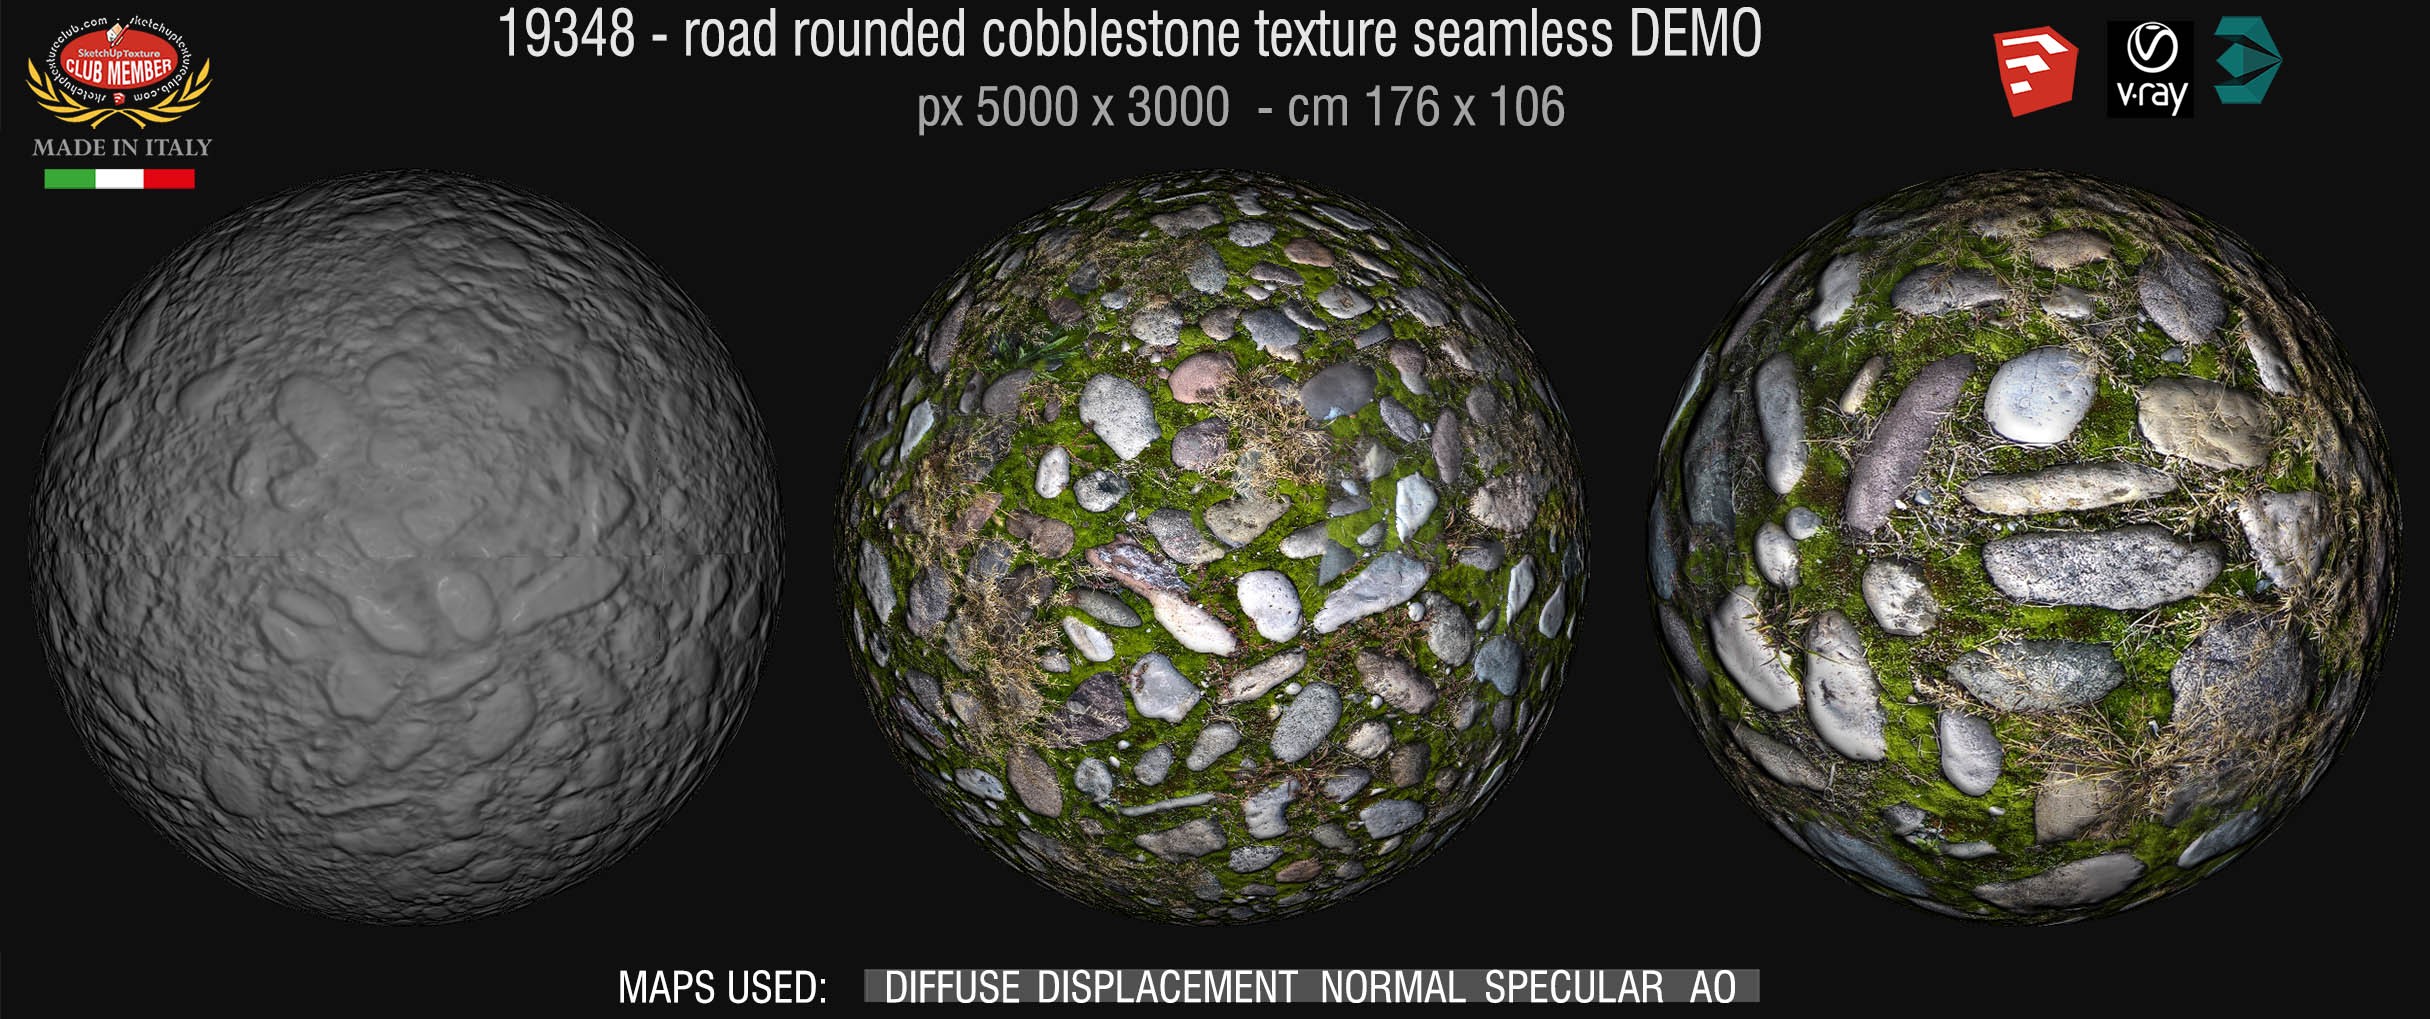 19348 Rounded cobblestone with moss texture seamless + maps DEMO